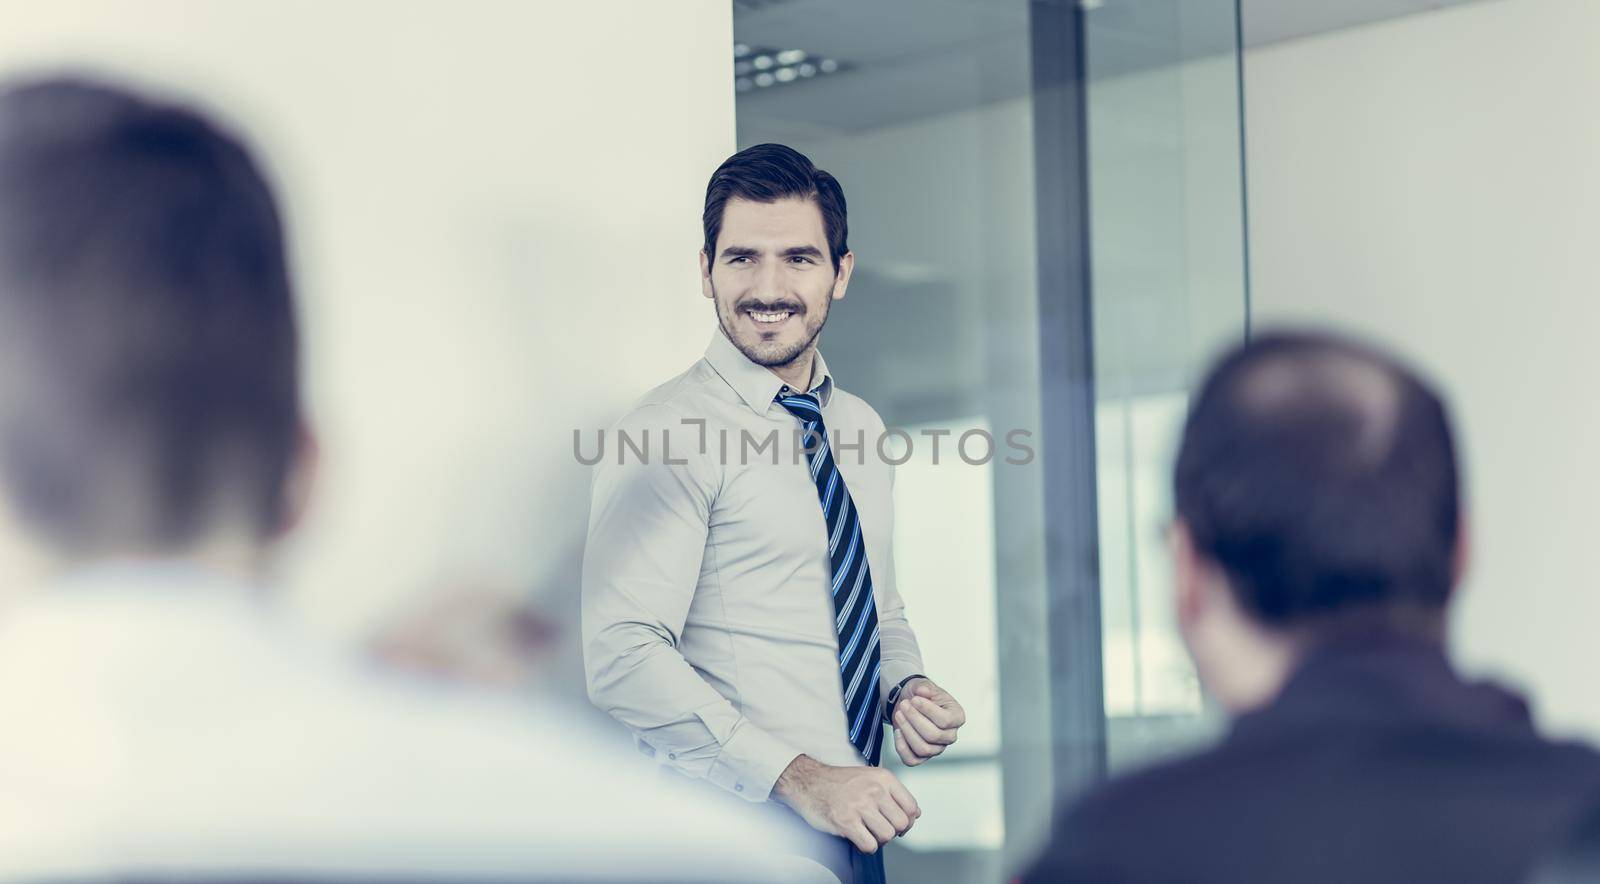 Relaxed cheerful team leader and business owner leading informal in-house business meeting. Business and entrepreneurship concept.